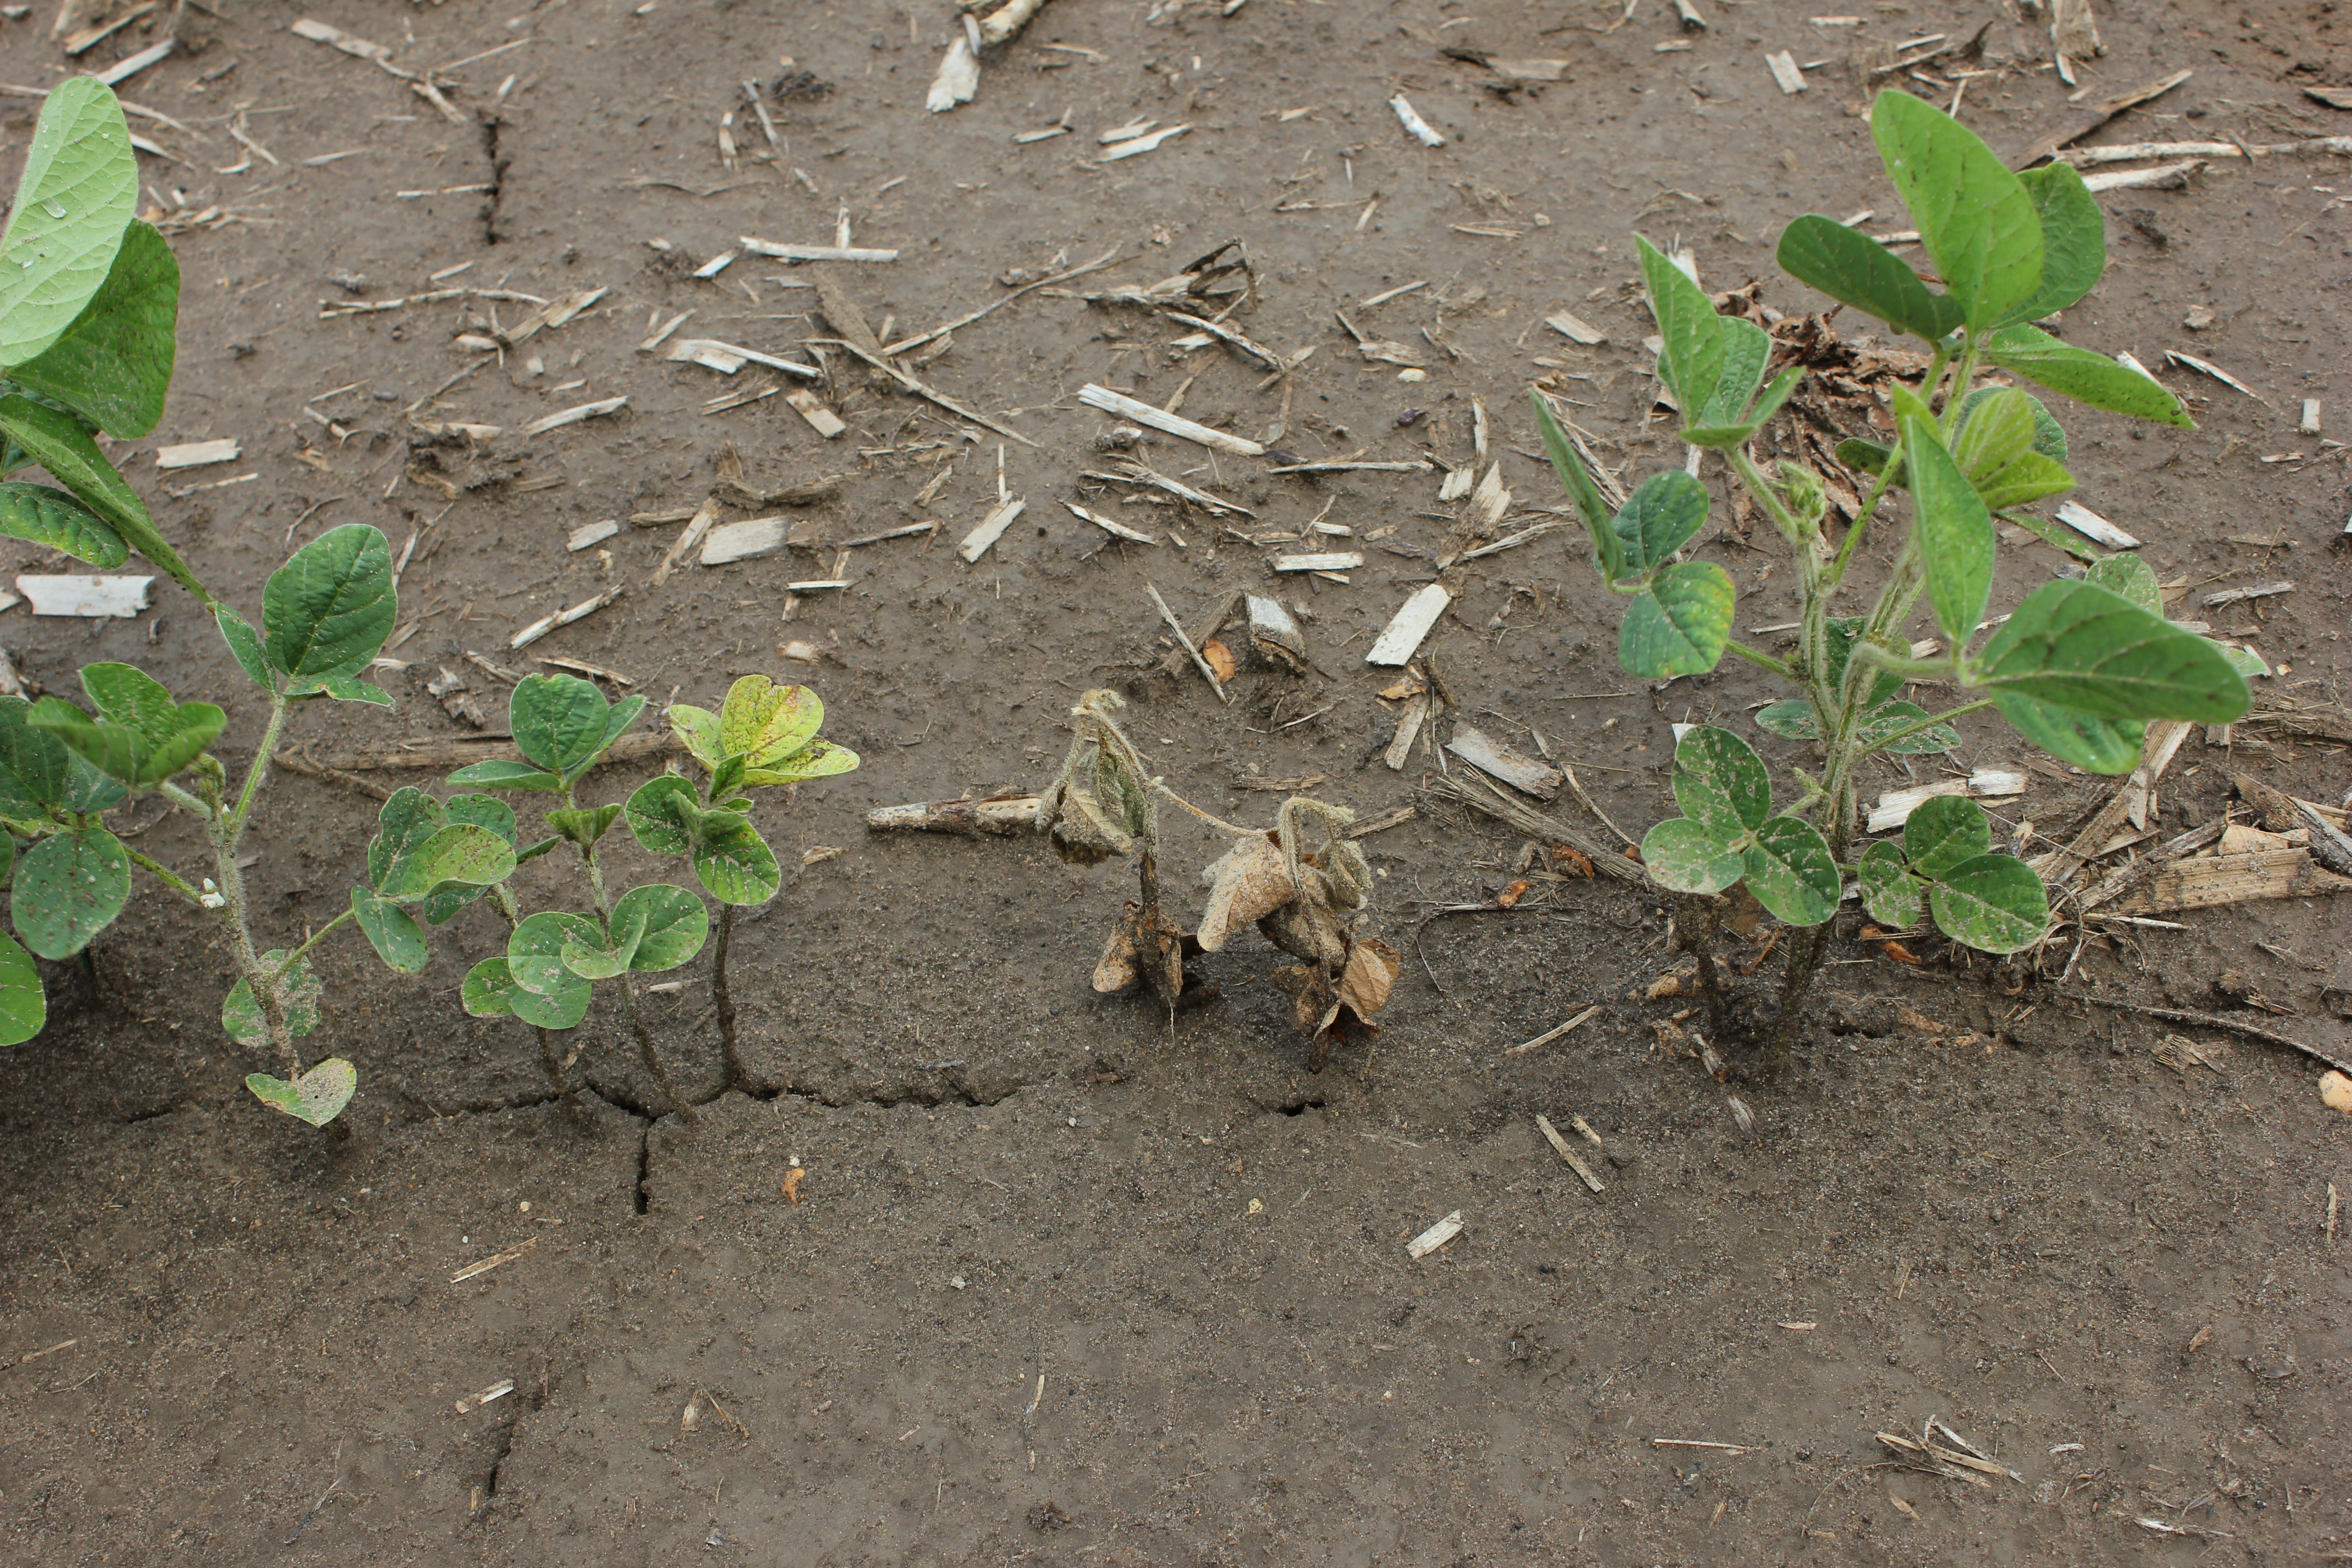 Damping off caused by Rhizoctonia seedling blight and root rot.